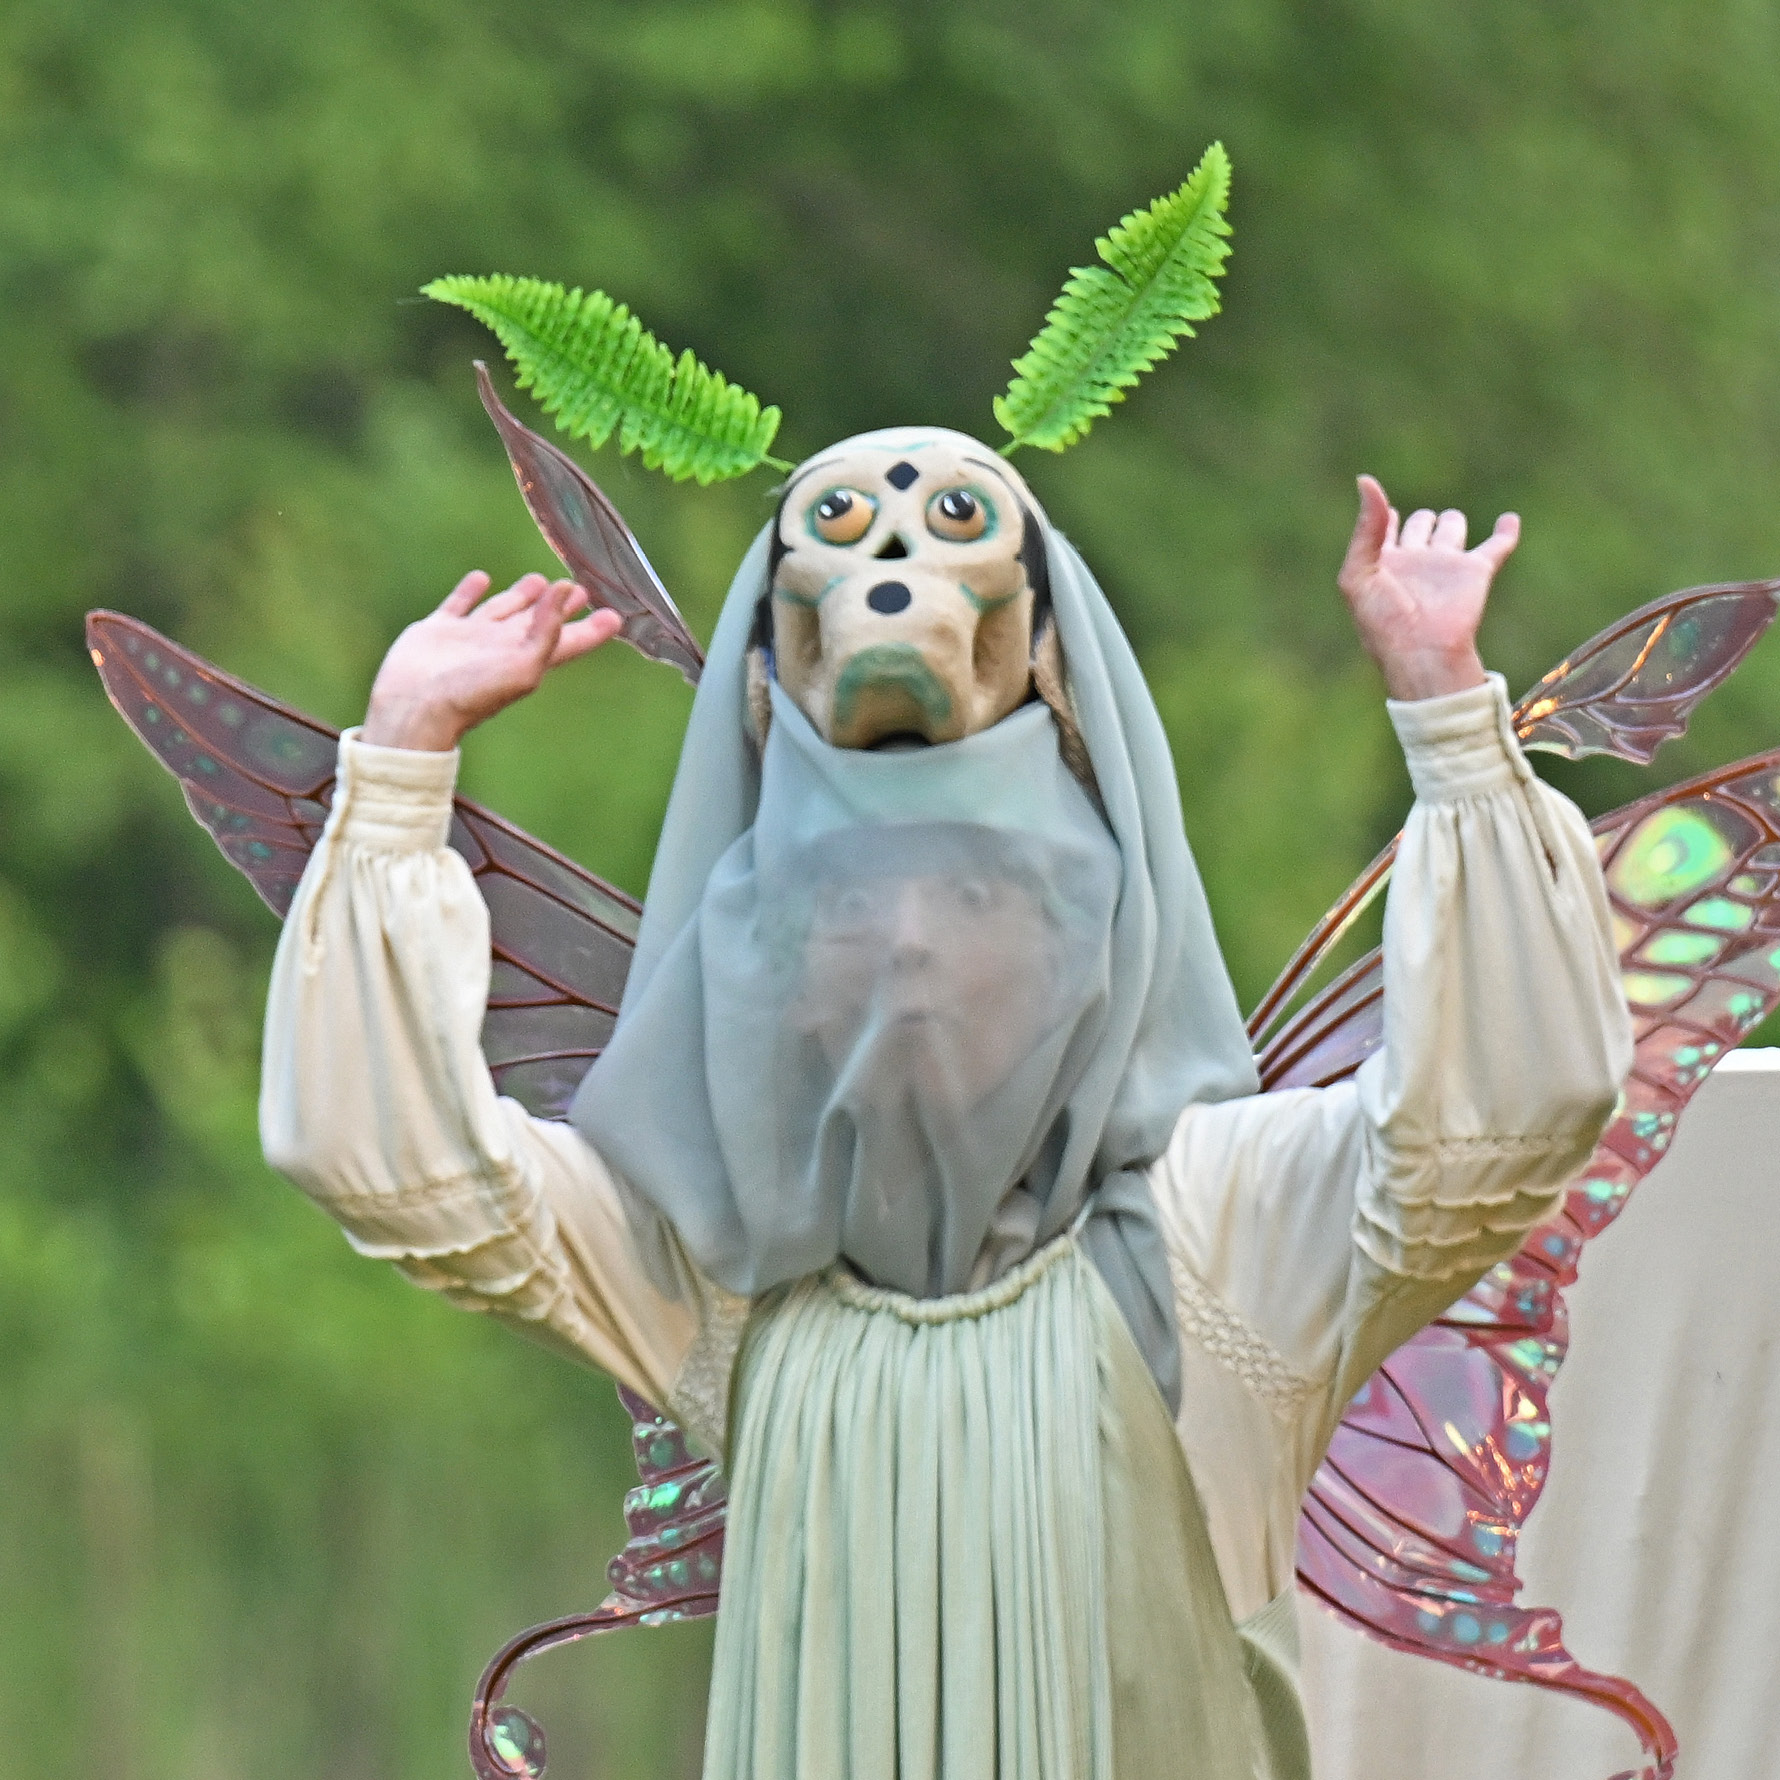 lock Theatre made a triumphant return to its longstanding Shakespeare in the Arboretum summer program with A Midsummer Night’s Dream in July.